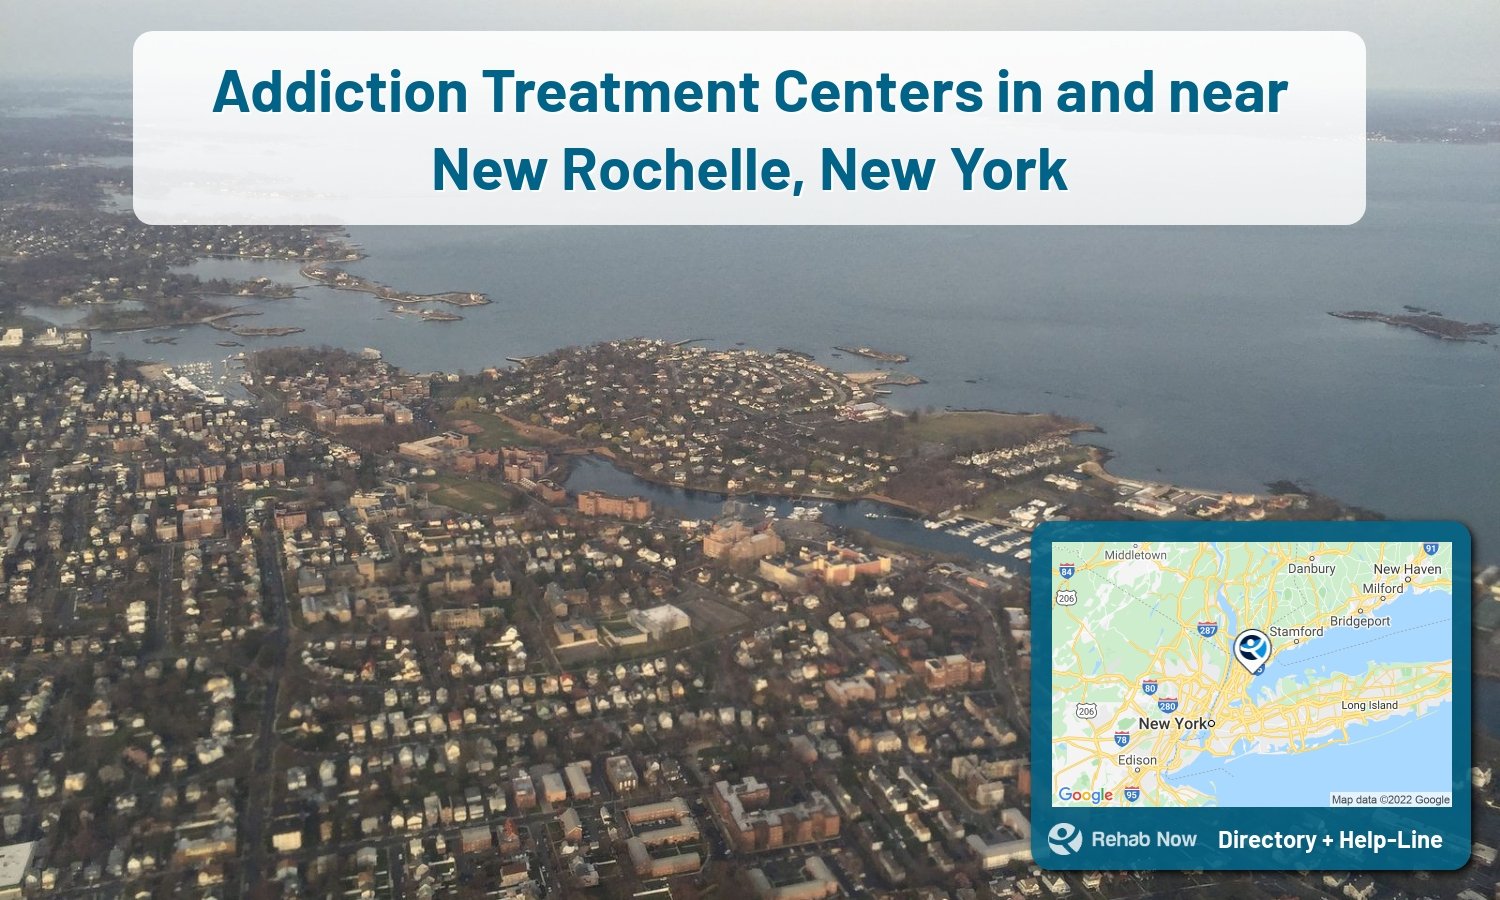 Our experts can help you find treatment now in New Rochelle, New York. We list drug rehab and alcohol centers in New York.